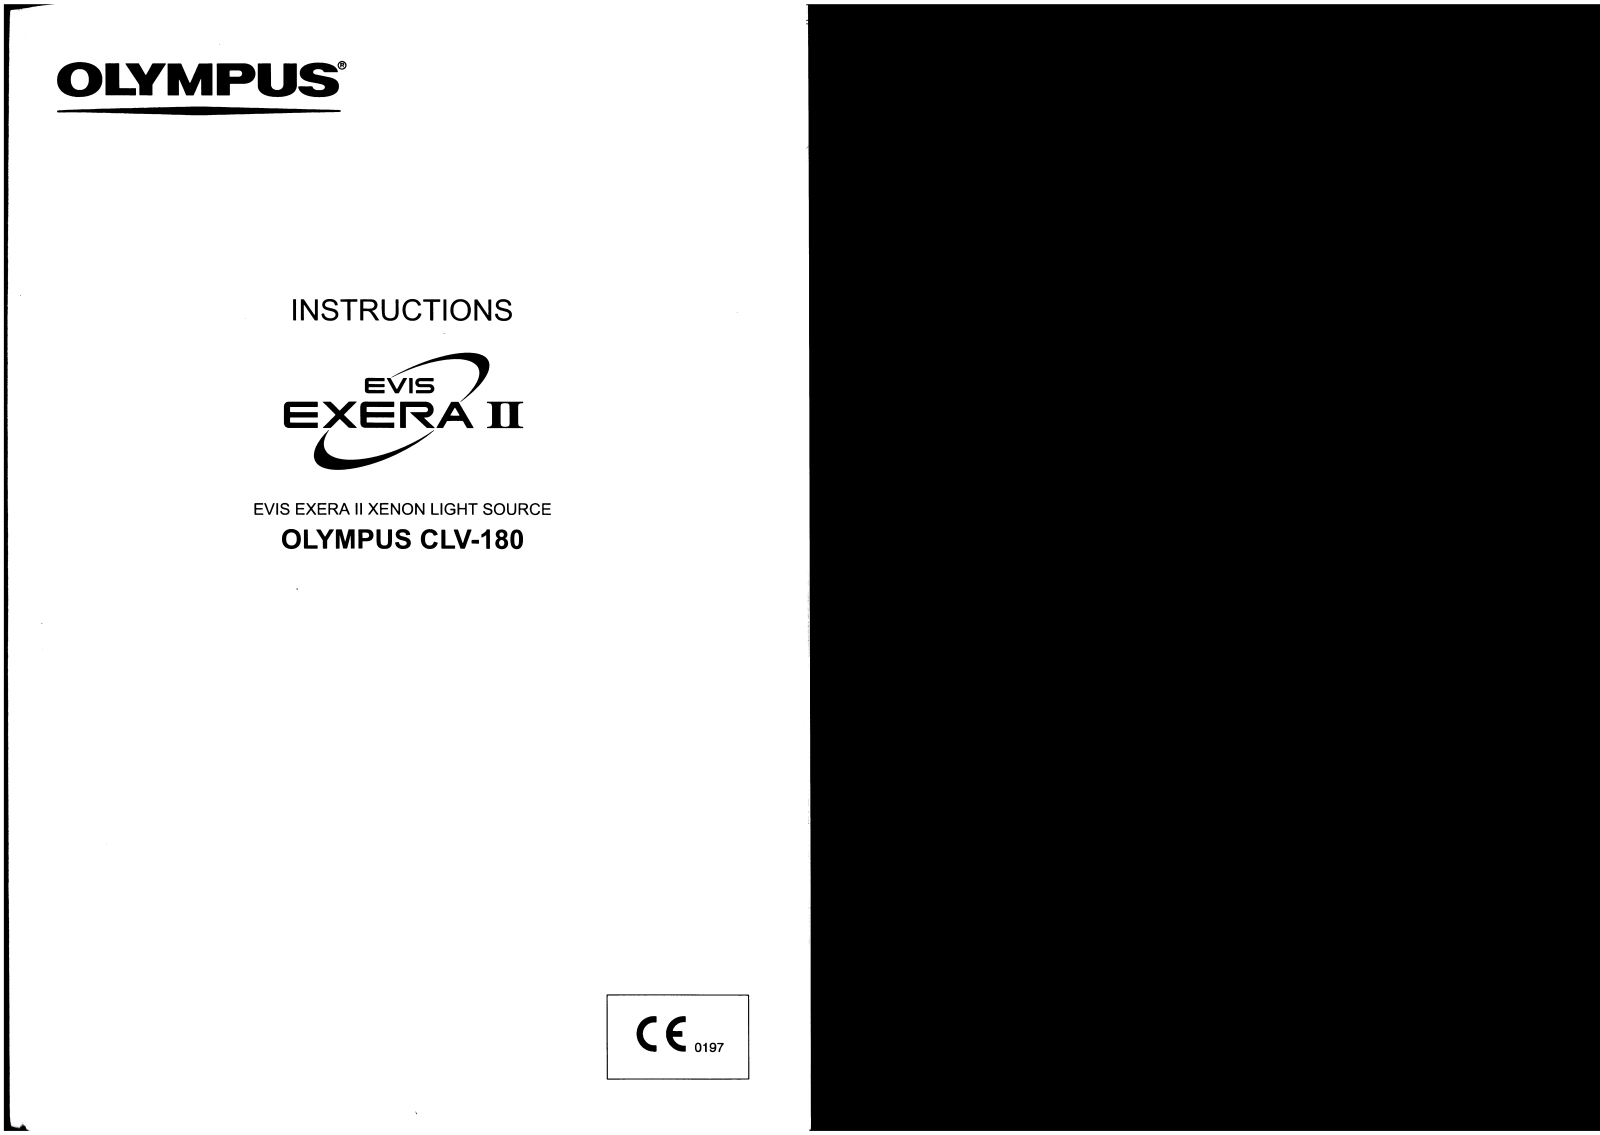 Olympus CLV-180 Evis Exera II Users guide